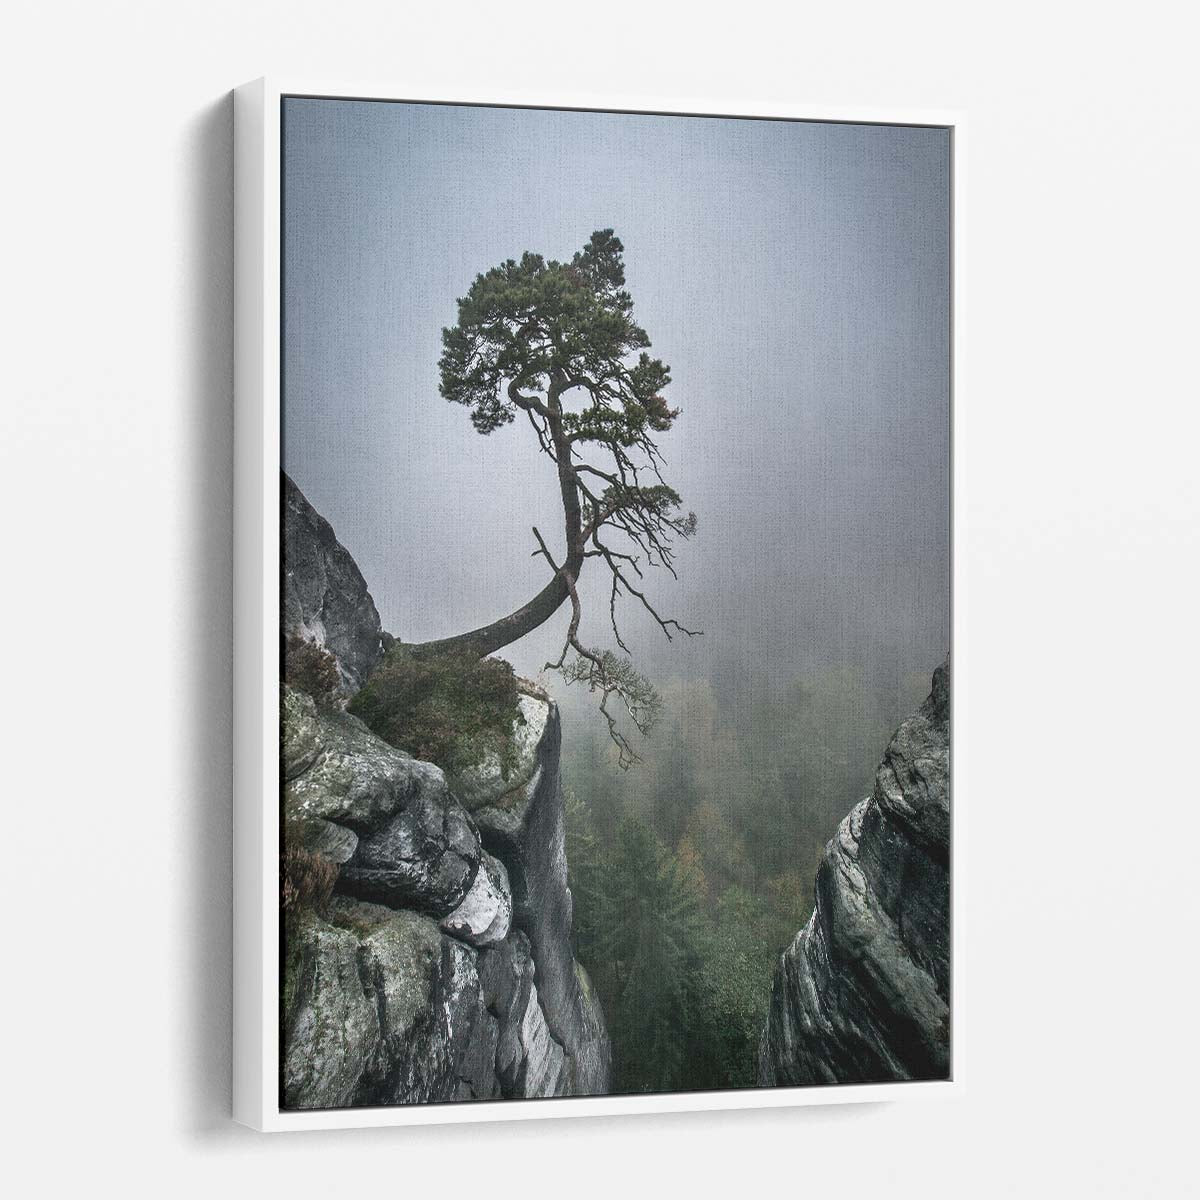 Lonely Bonsai Tree on Cliffside, Foggy Swiss-German Landscape Photography by Luxuriance Designs, made in USA